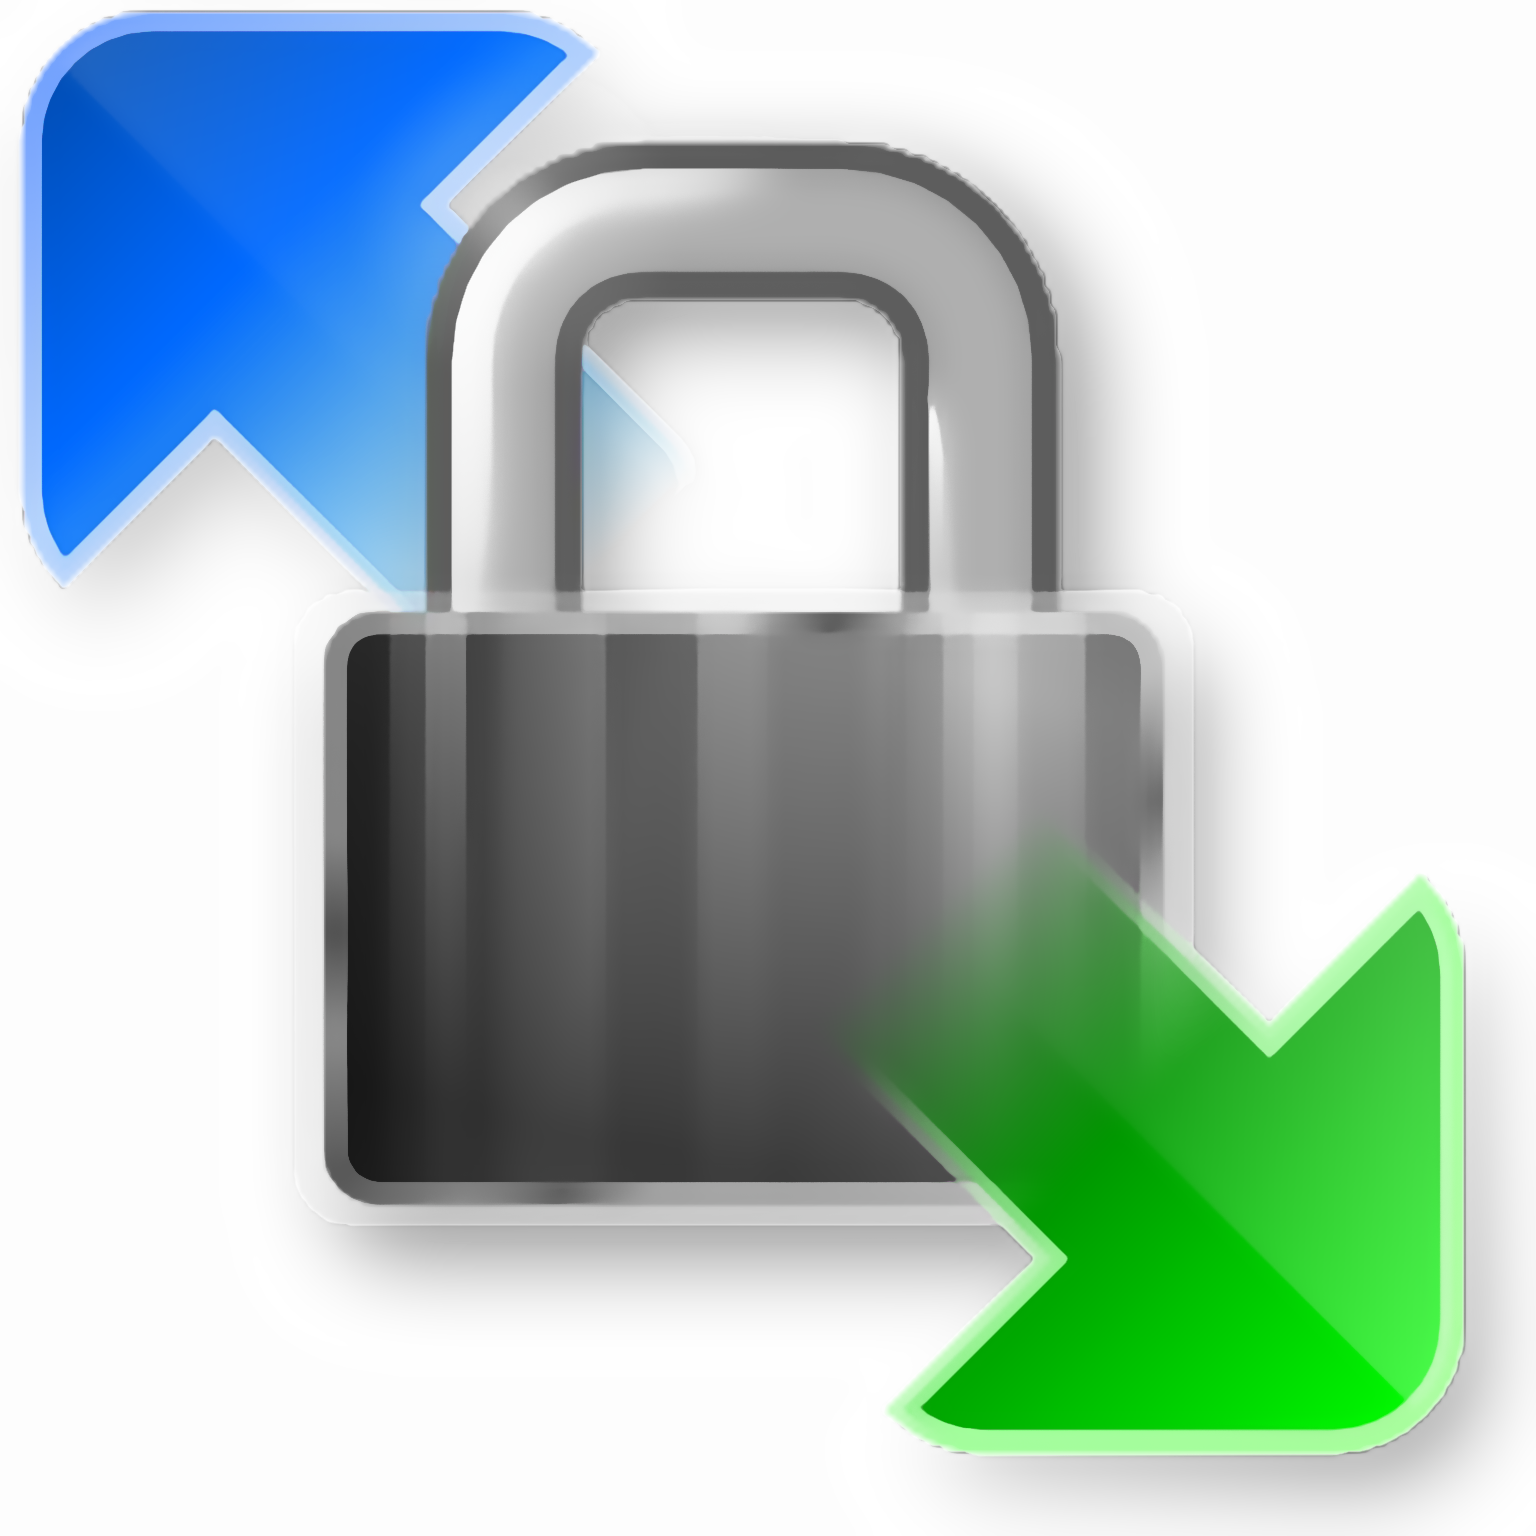 WinSCP 6.1.1 download the new